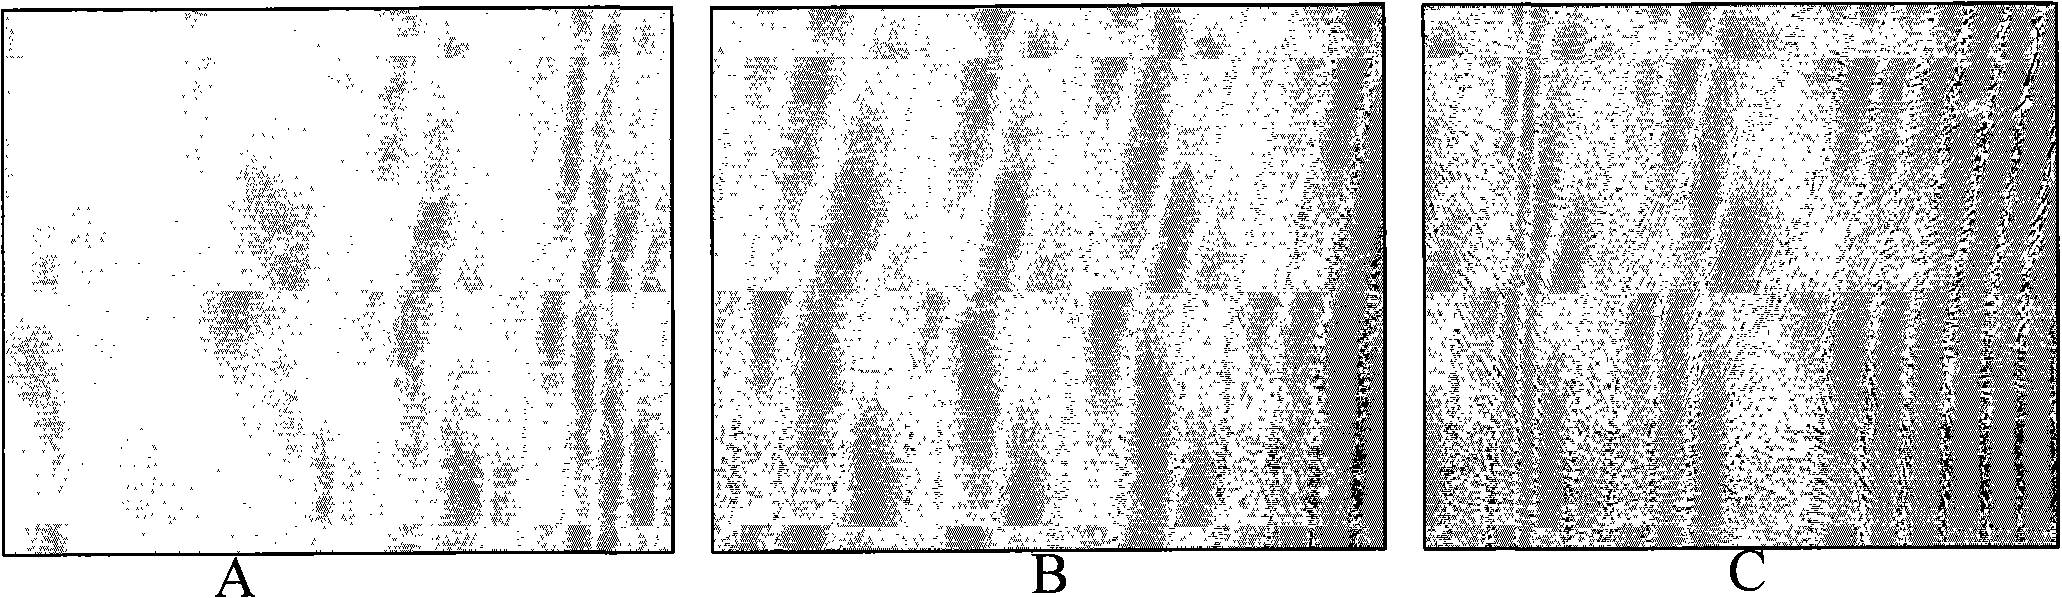 Method for amplifying mesenchymal stem cells of human umbilical cord and placenta in vitro